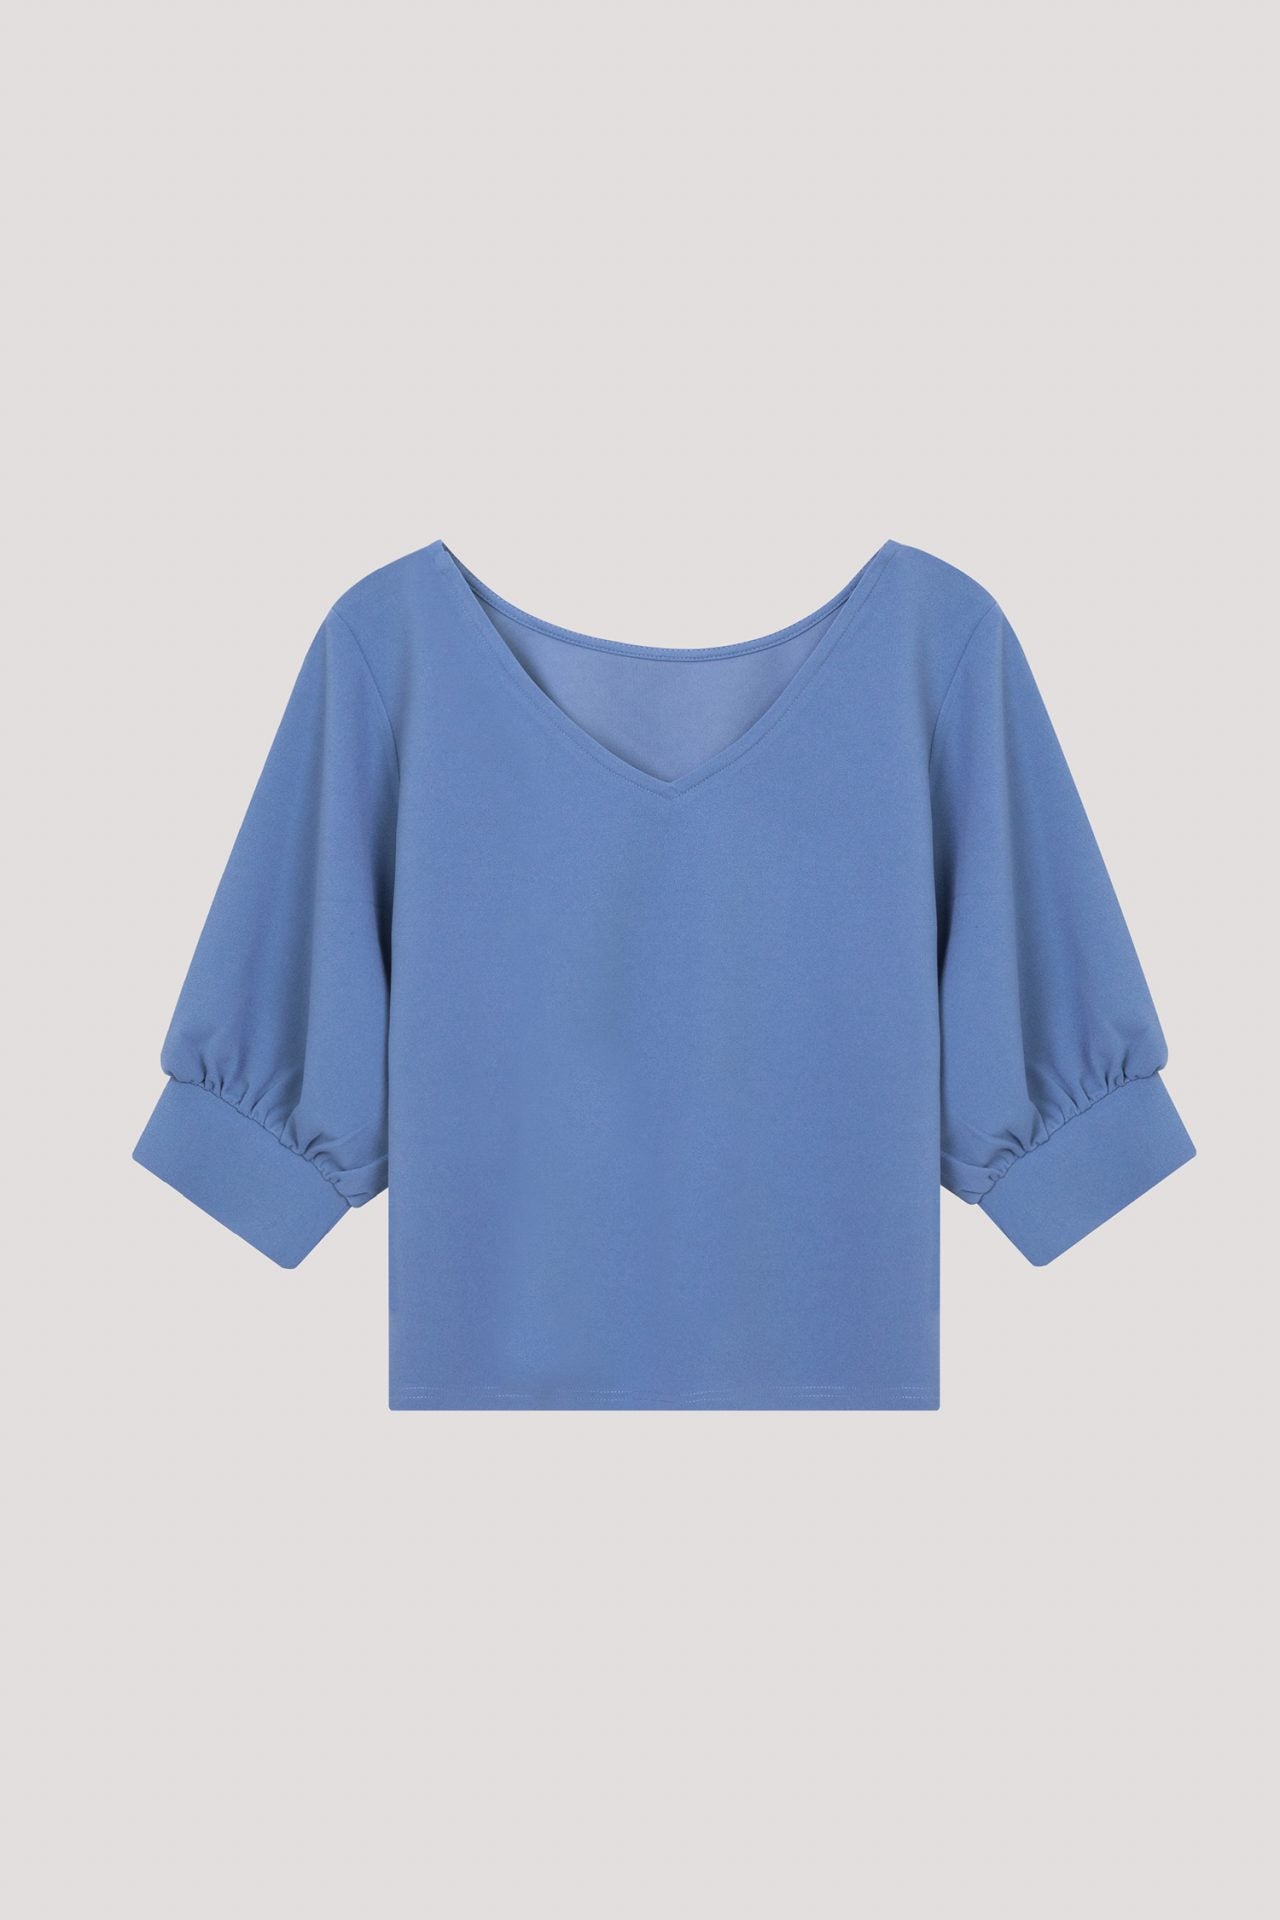 AT 10670 PUFFED SLEEVES BLOUSE STEEL BLUE